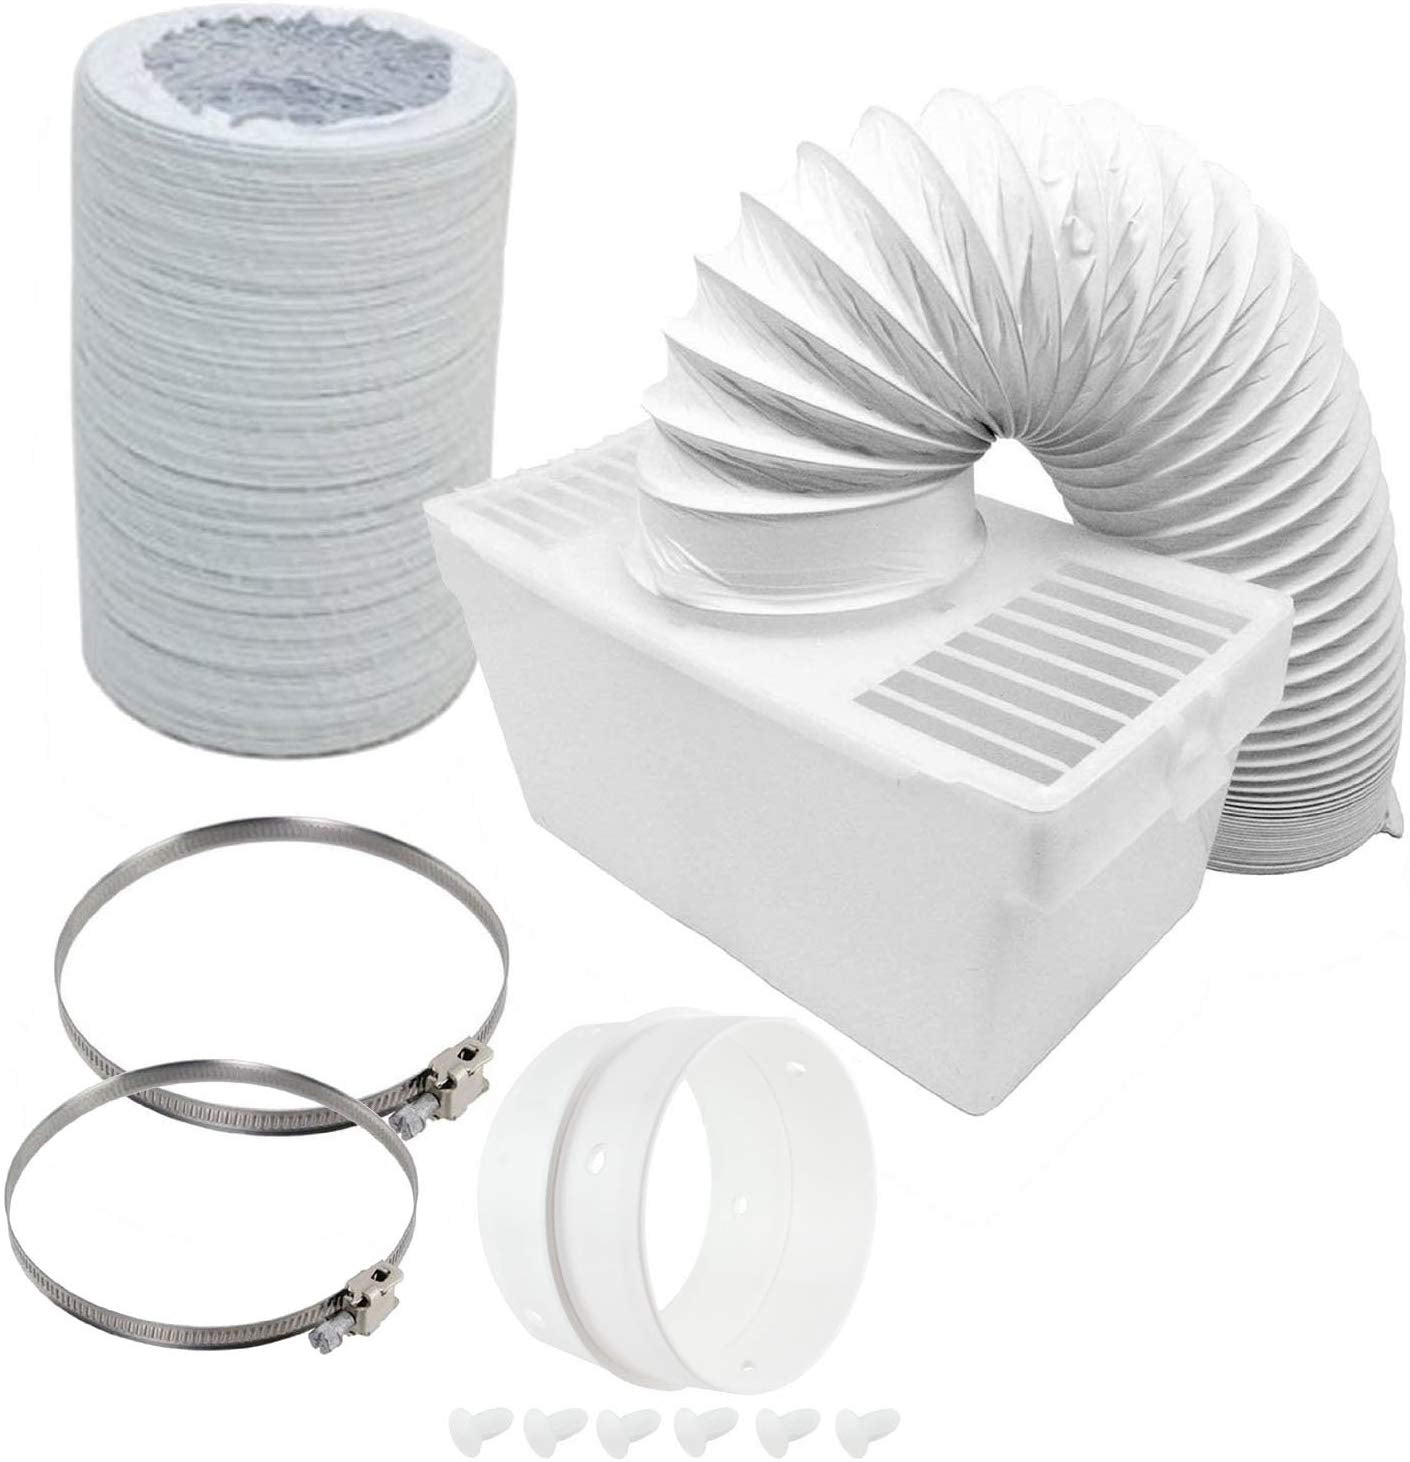 Condenser Box & Extra Long Hose Kit With Connection Ring for Hotpoint Tumble Dryer (4" / 100mm Diameter / 6M Hose)